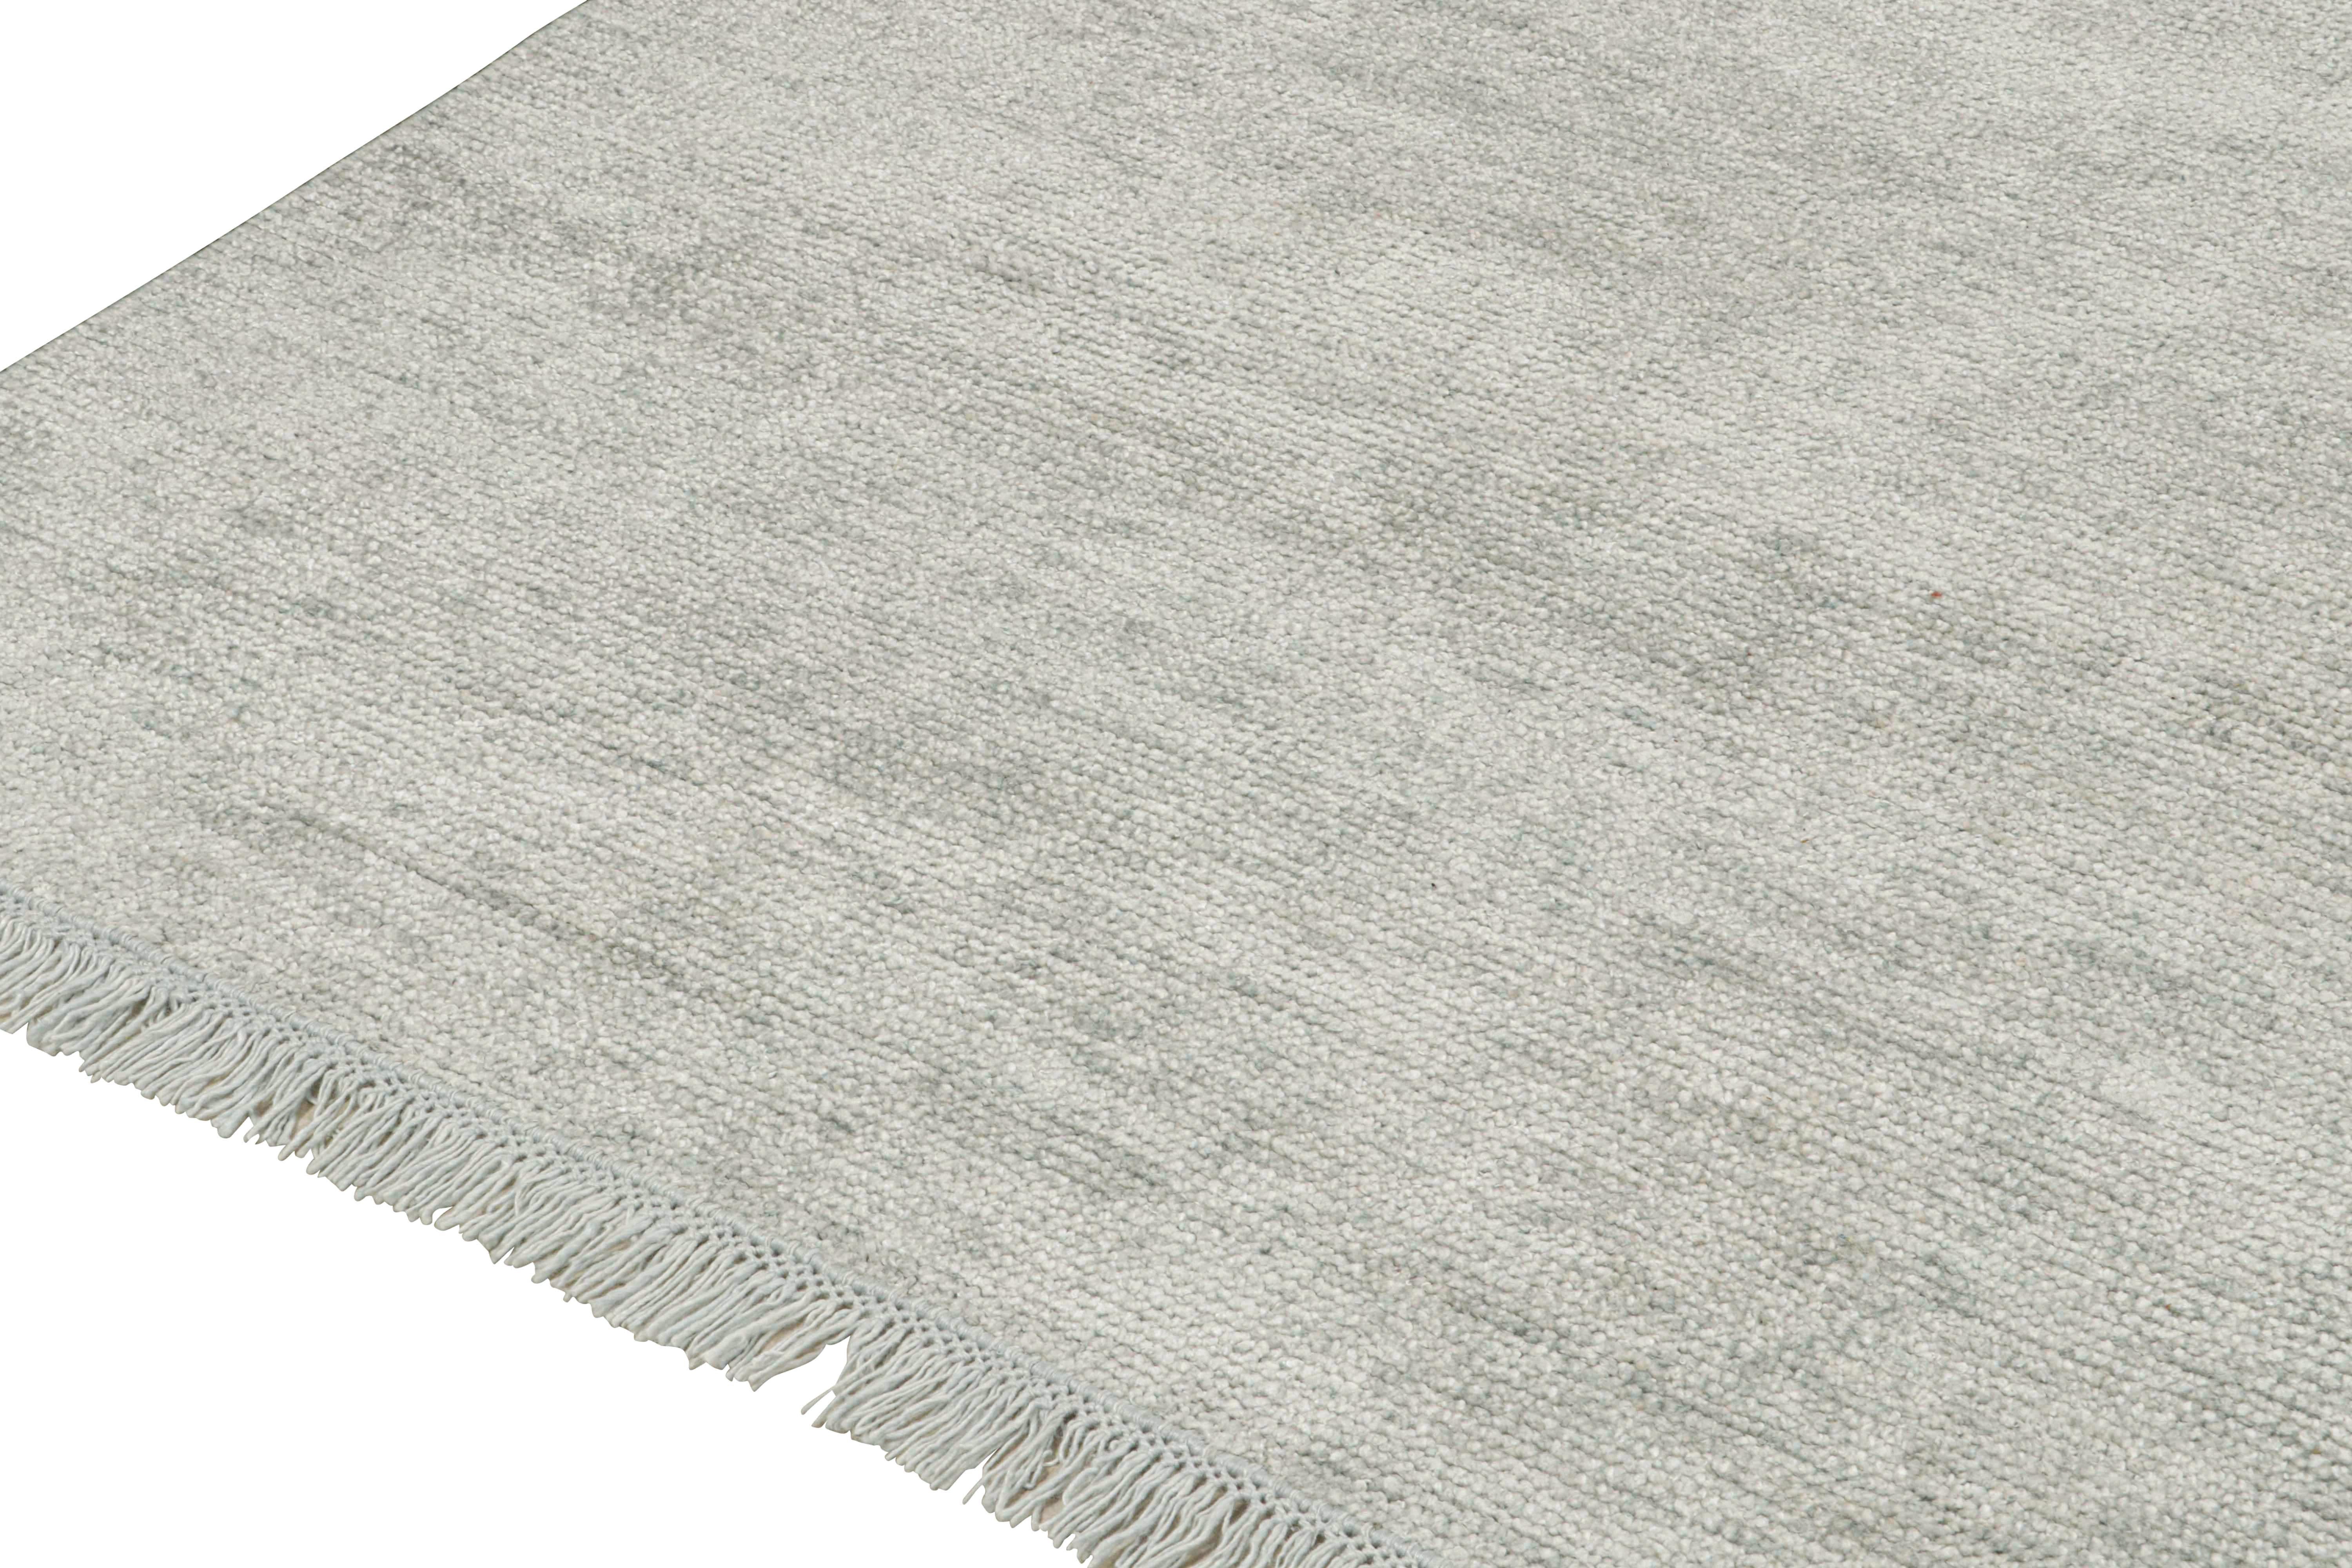 Contemporary Rug & Kilim’s Modern Rug in Solid Silver-Gray Tone-on-tone Striae For Sale